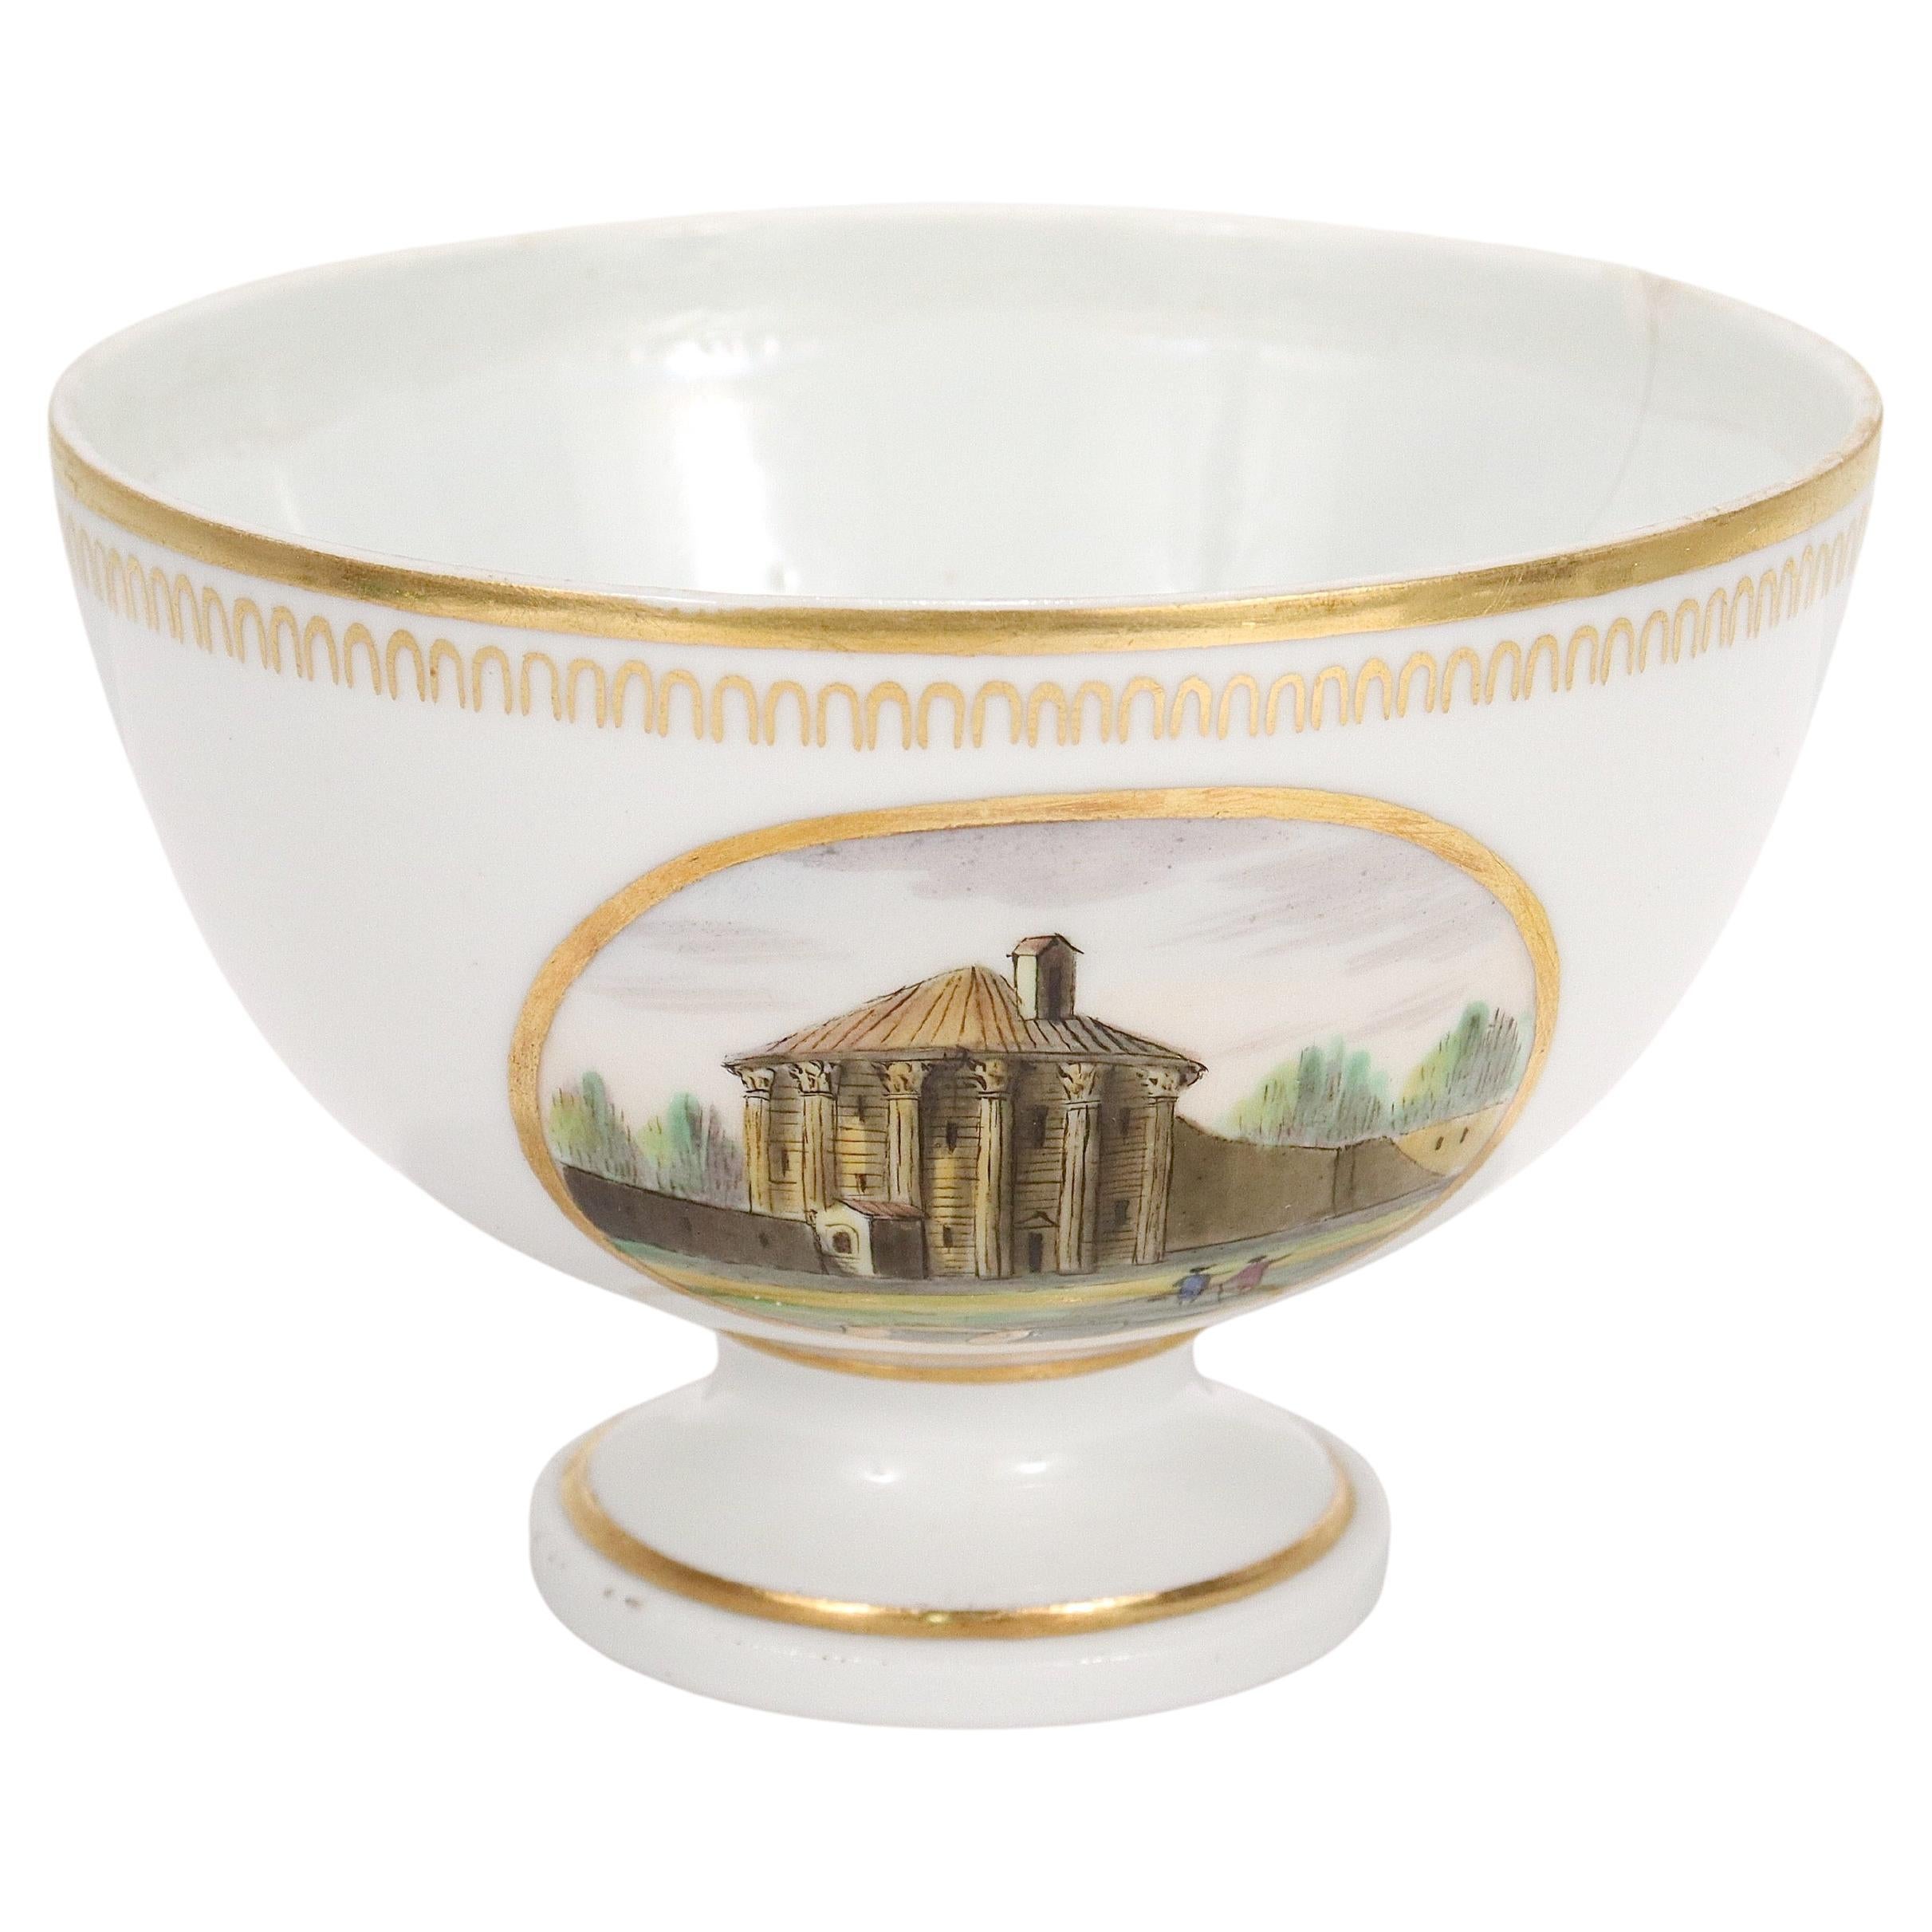 Antique Doccia Porcelain Italian Neoclassical Topographical Waste Bowl For Sale